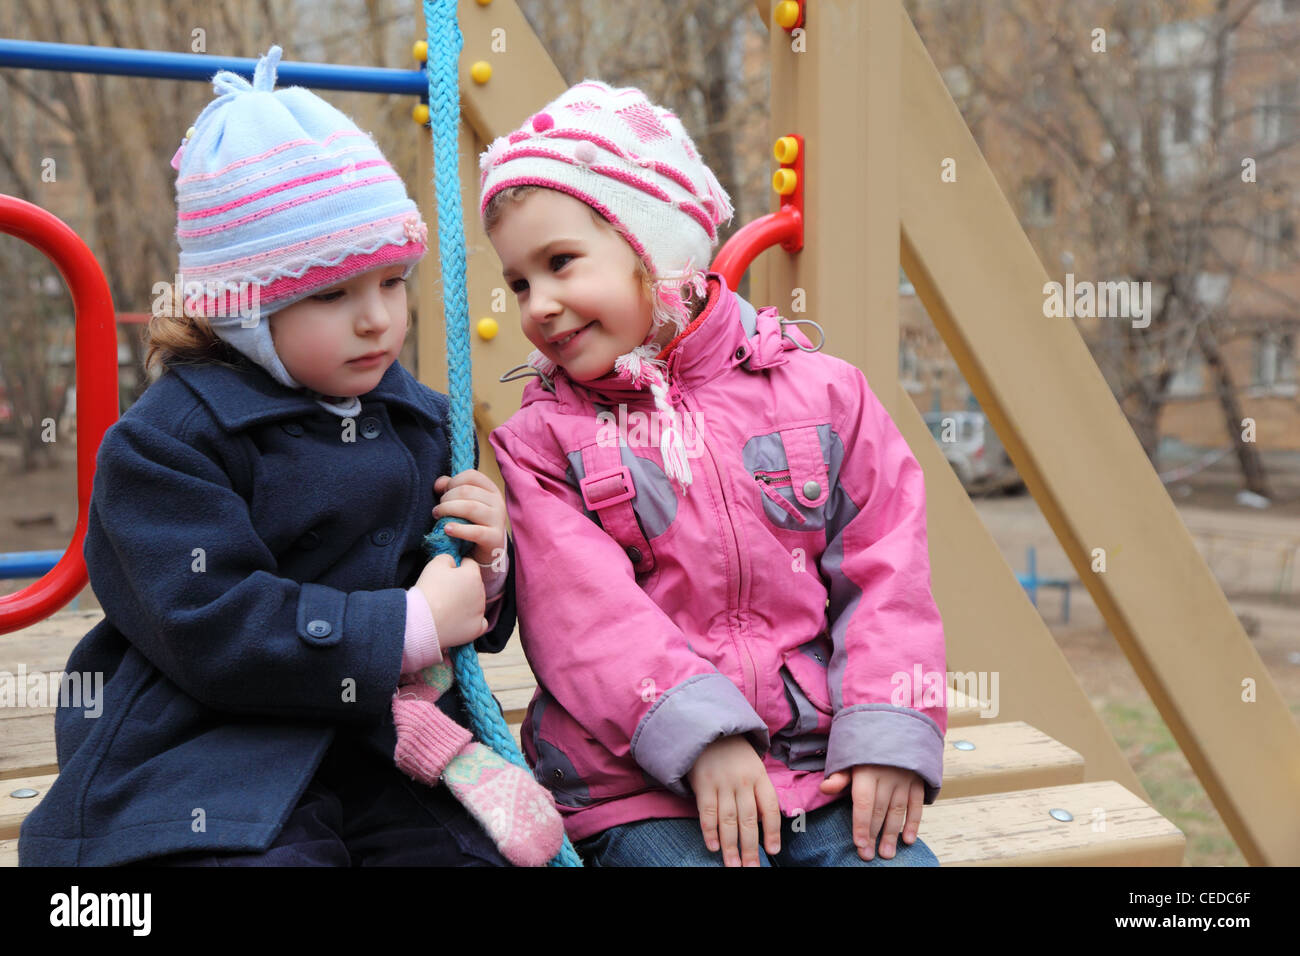 Two girls sit on playground, happy and sad Stock Photo